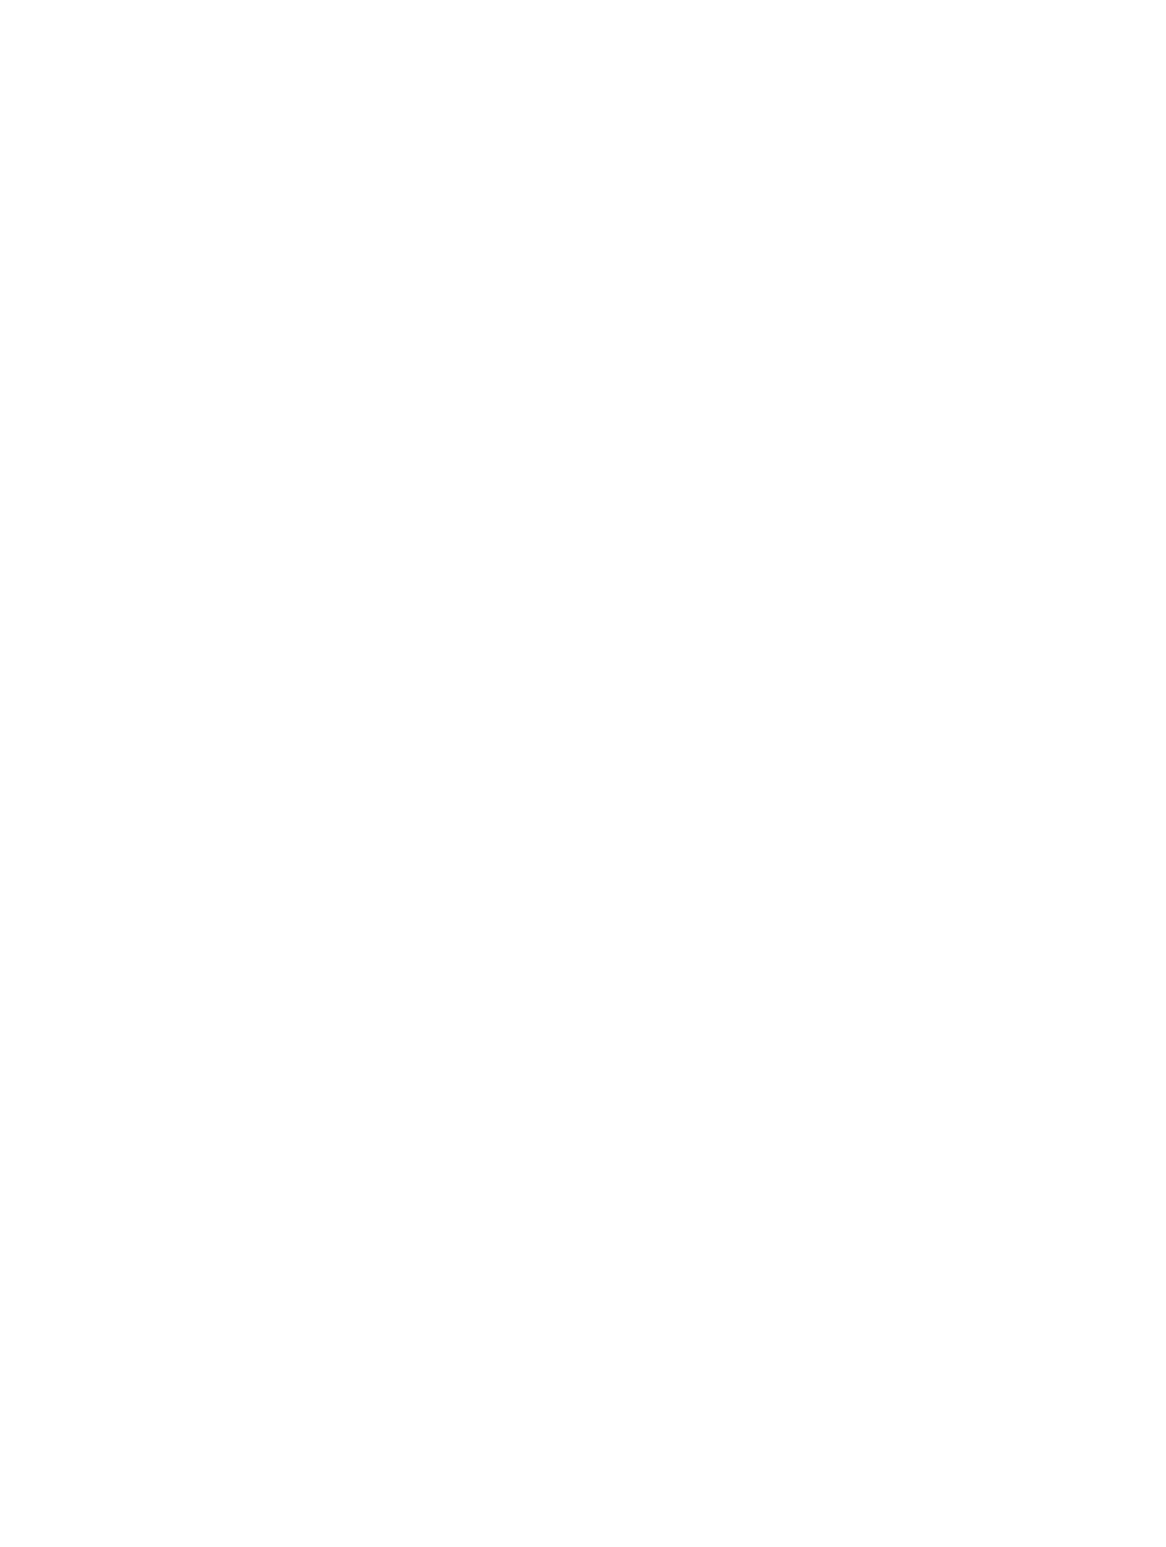 Crompton Greaves Consumer Electricals logo pour fonds sombres (PNG transparent)